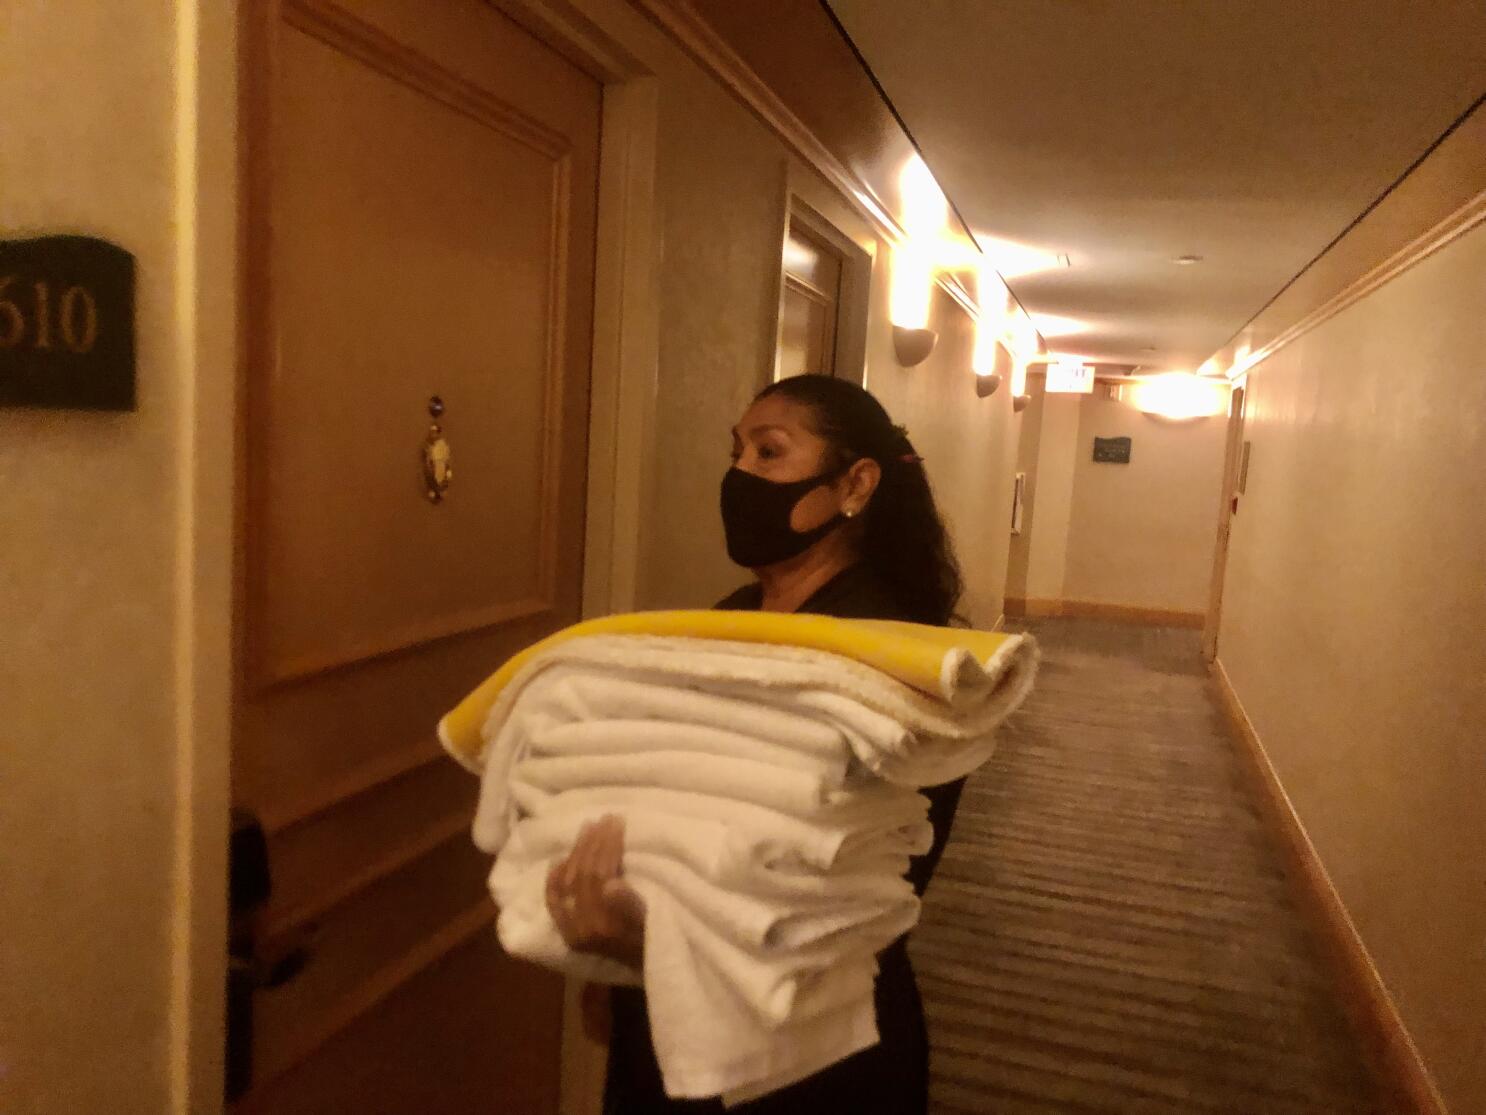 Maid With Fresh Clean Towels During Housekeeping In A Hotel Room